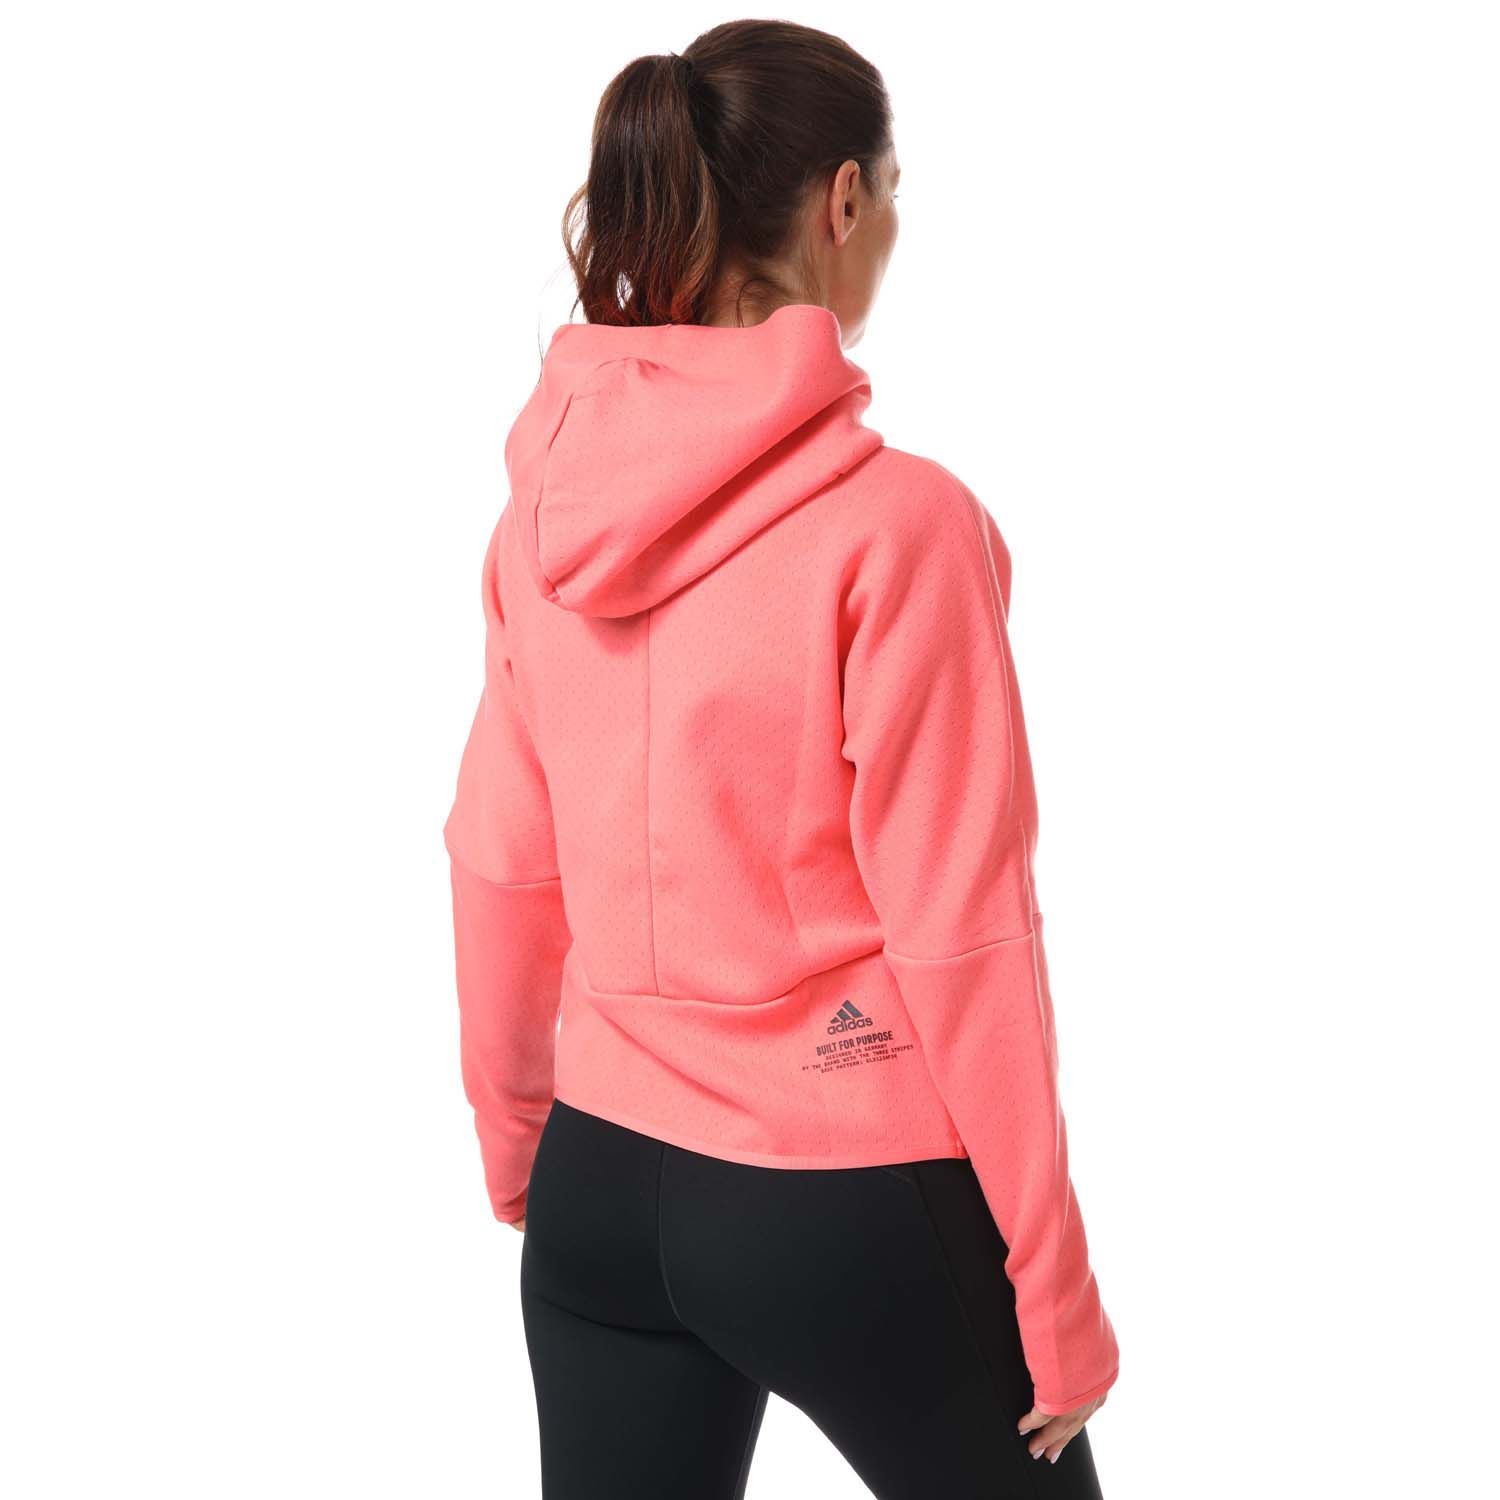 Womens adidas Z.N.E. Zip Hoody in coral.-Hooded jacket.- Zip fastening.- Side zip pockets.- Thumbholes.- Relaxed fit.- Body: 60% Cotton  40% Polyester (Recycled). - Ref: GM3280